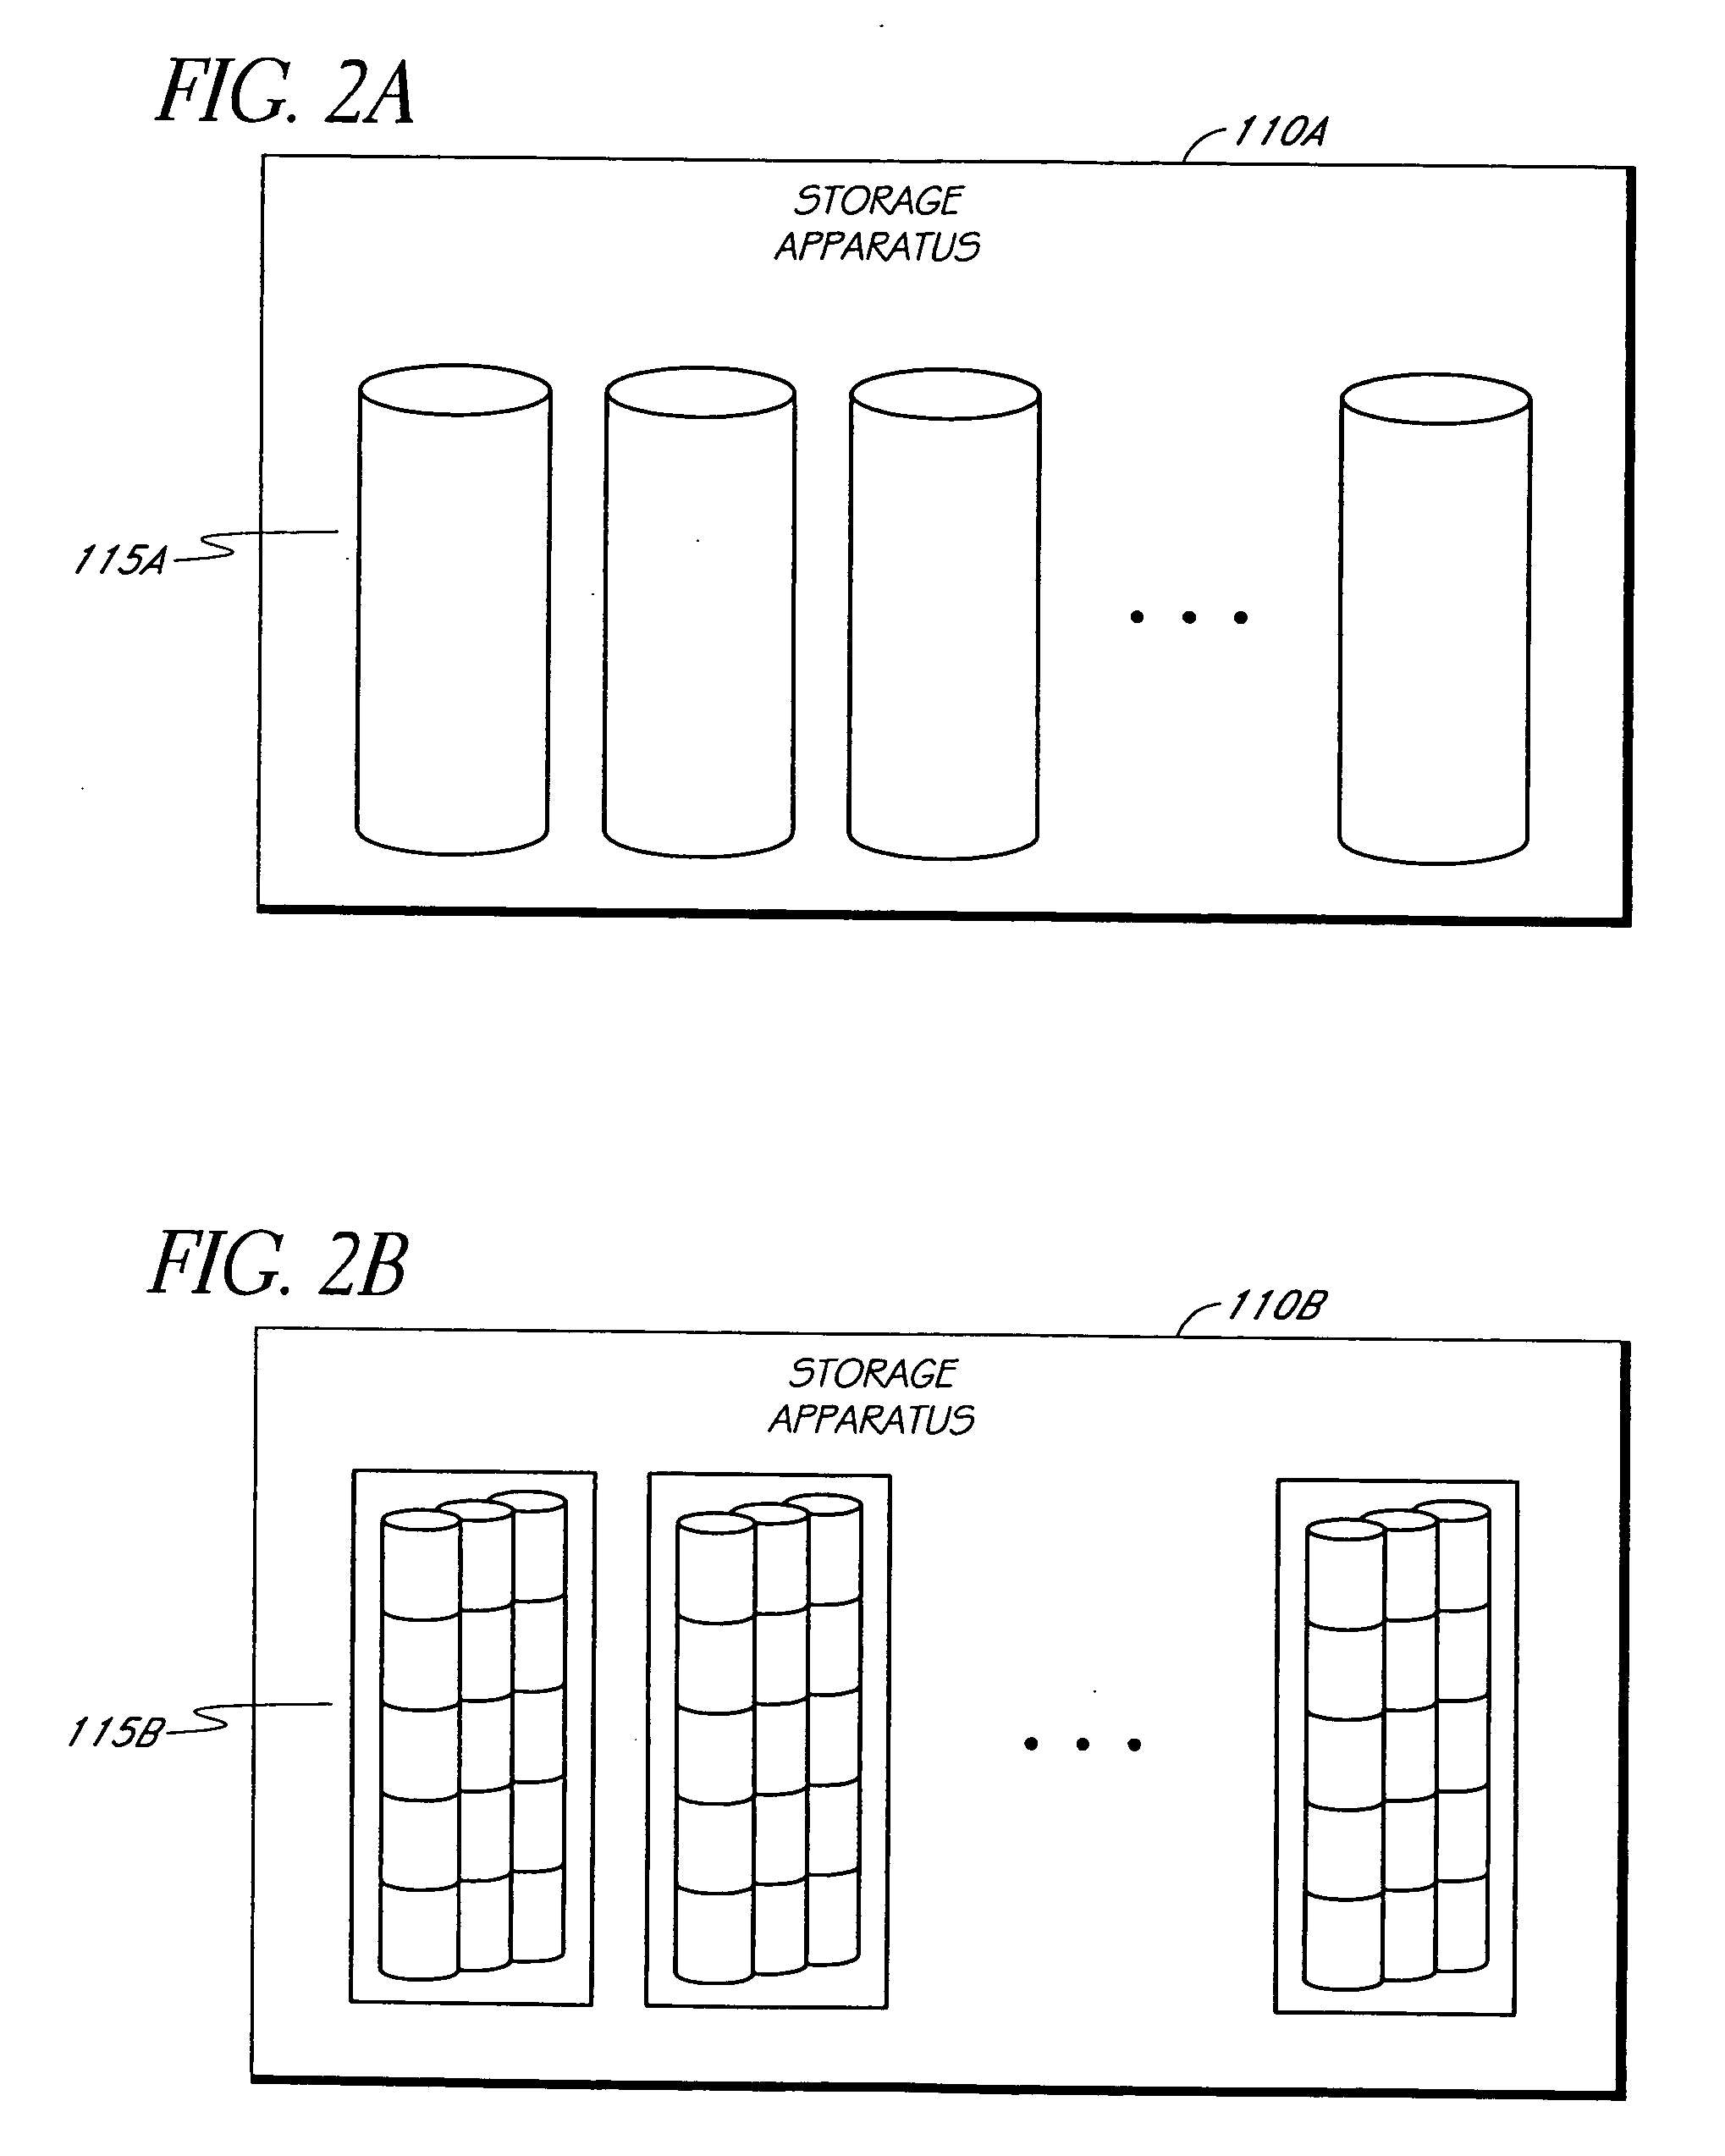 Systems and methods for providing heterogeneous storage systems